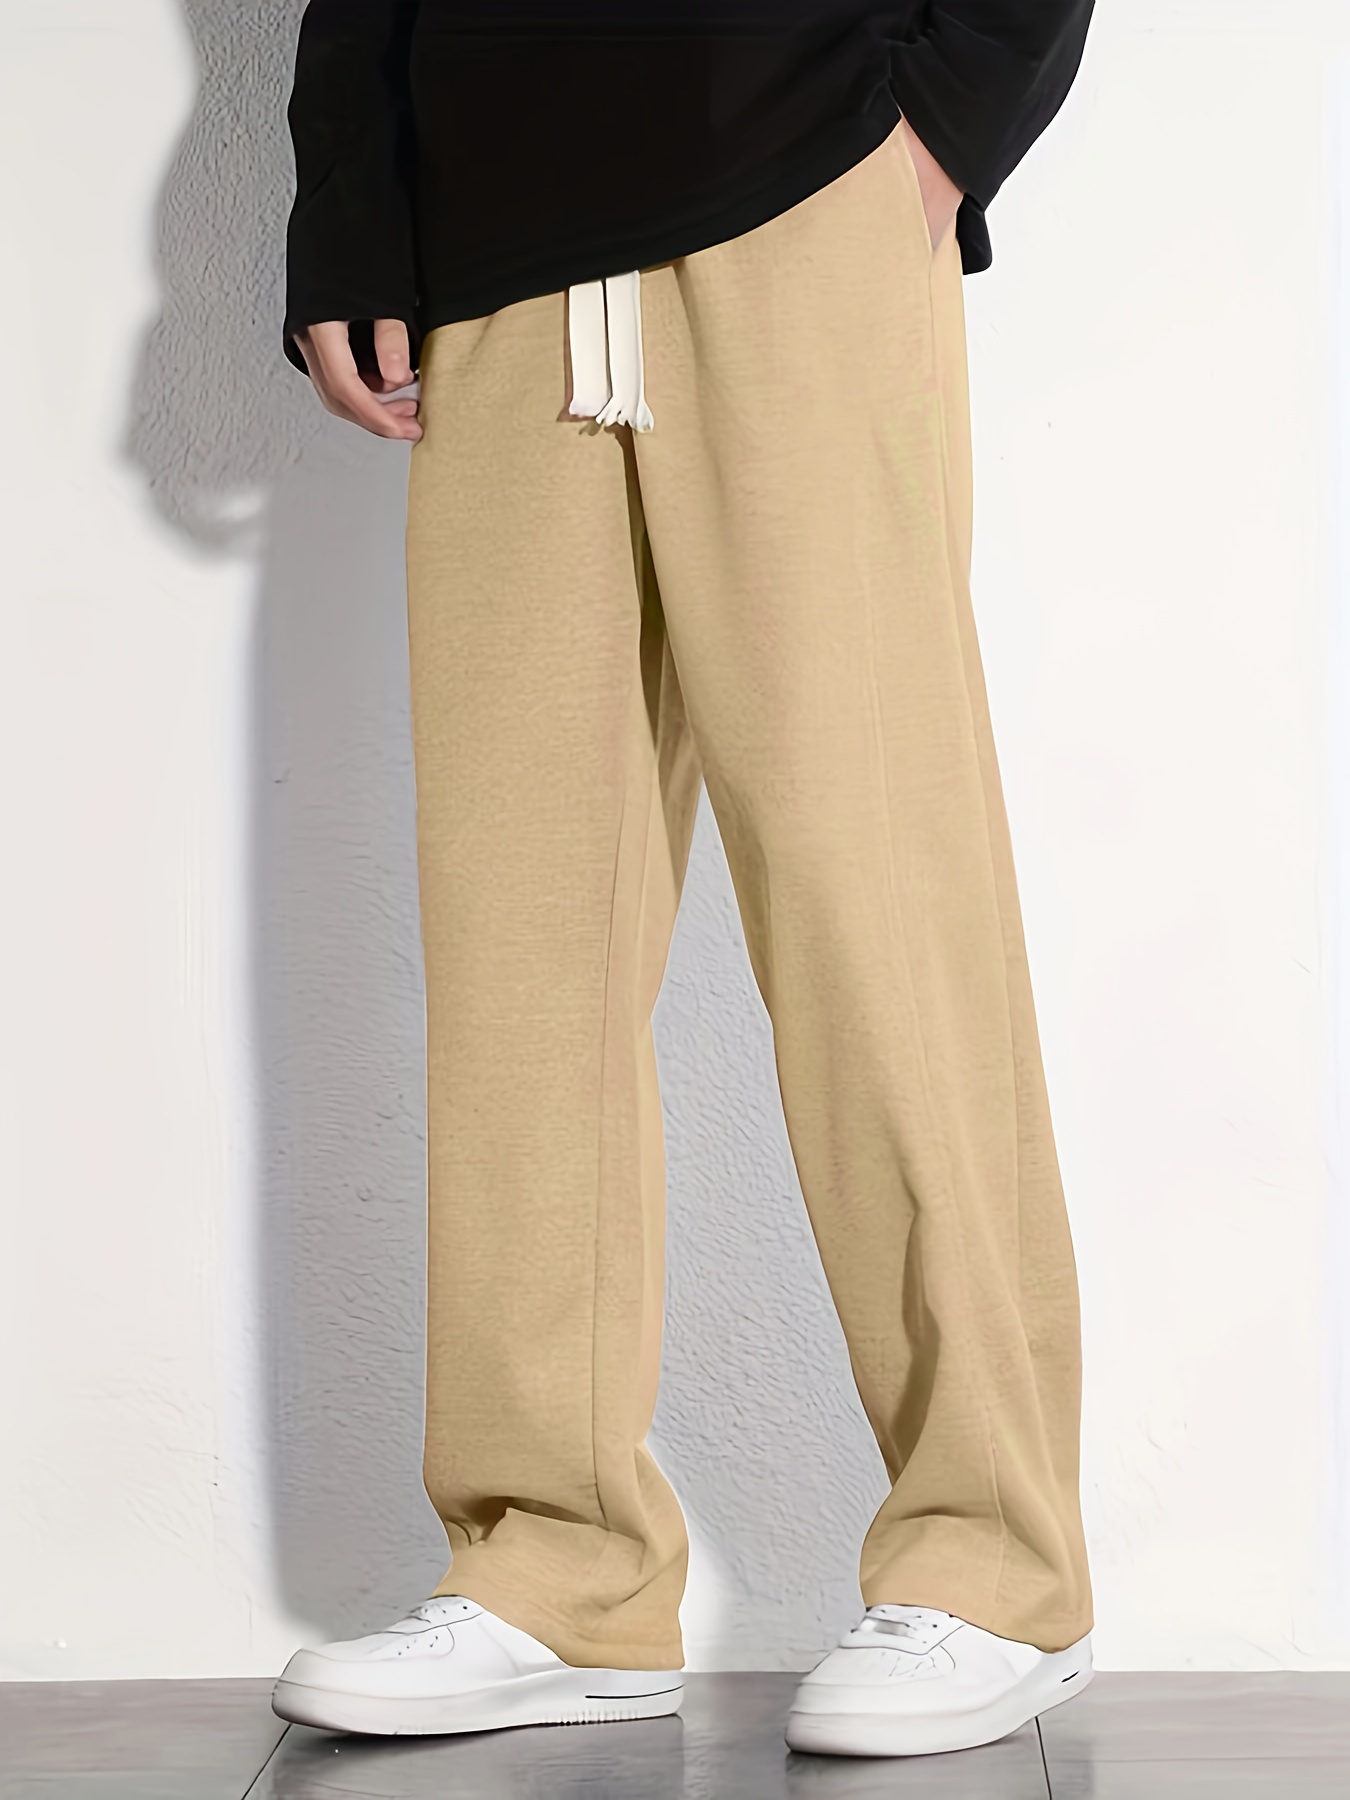 Men's Loose Fit Straight Leg Pants, Casual Comfy Drawstring Thin Trousers  For Spring Summer